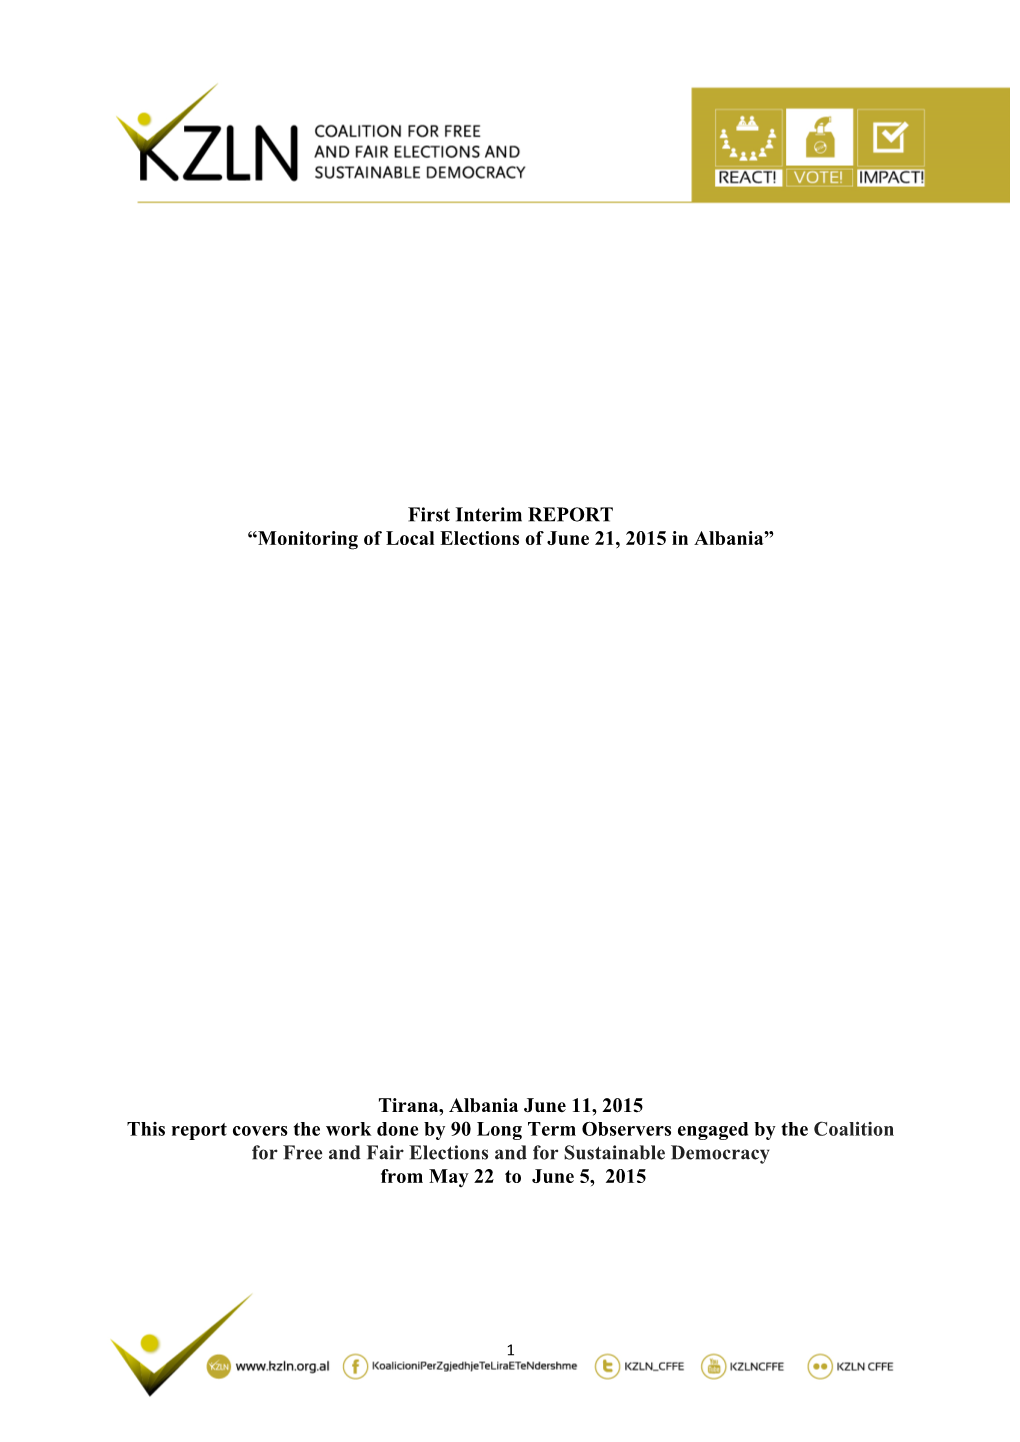 First Interim REPORT “Monitoring of Local Elections of June 21, 2015 in Albania”